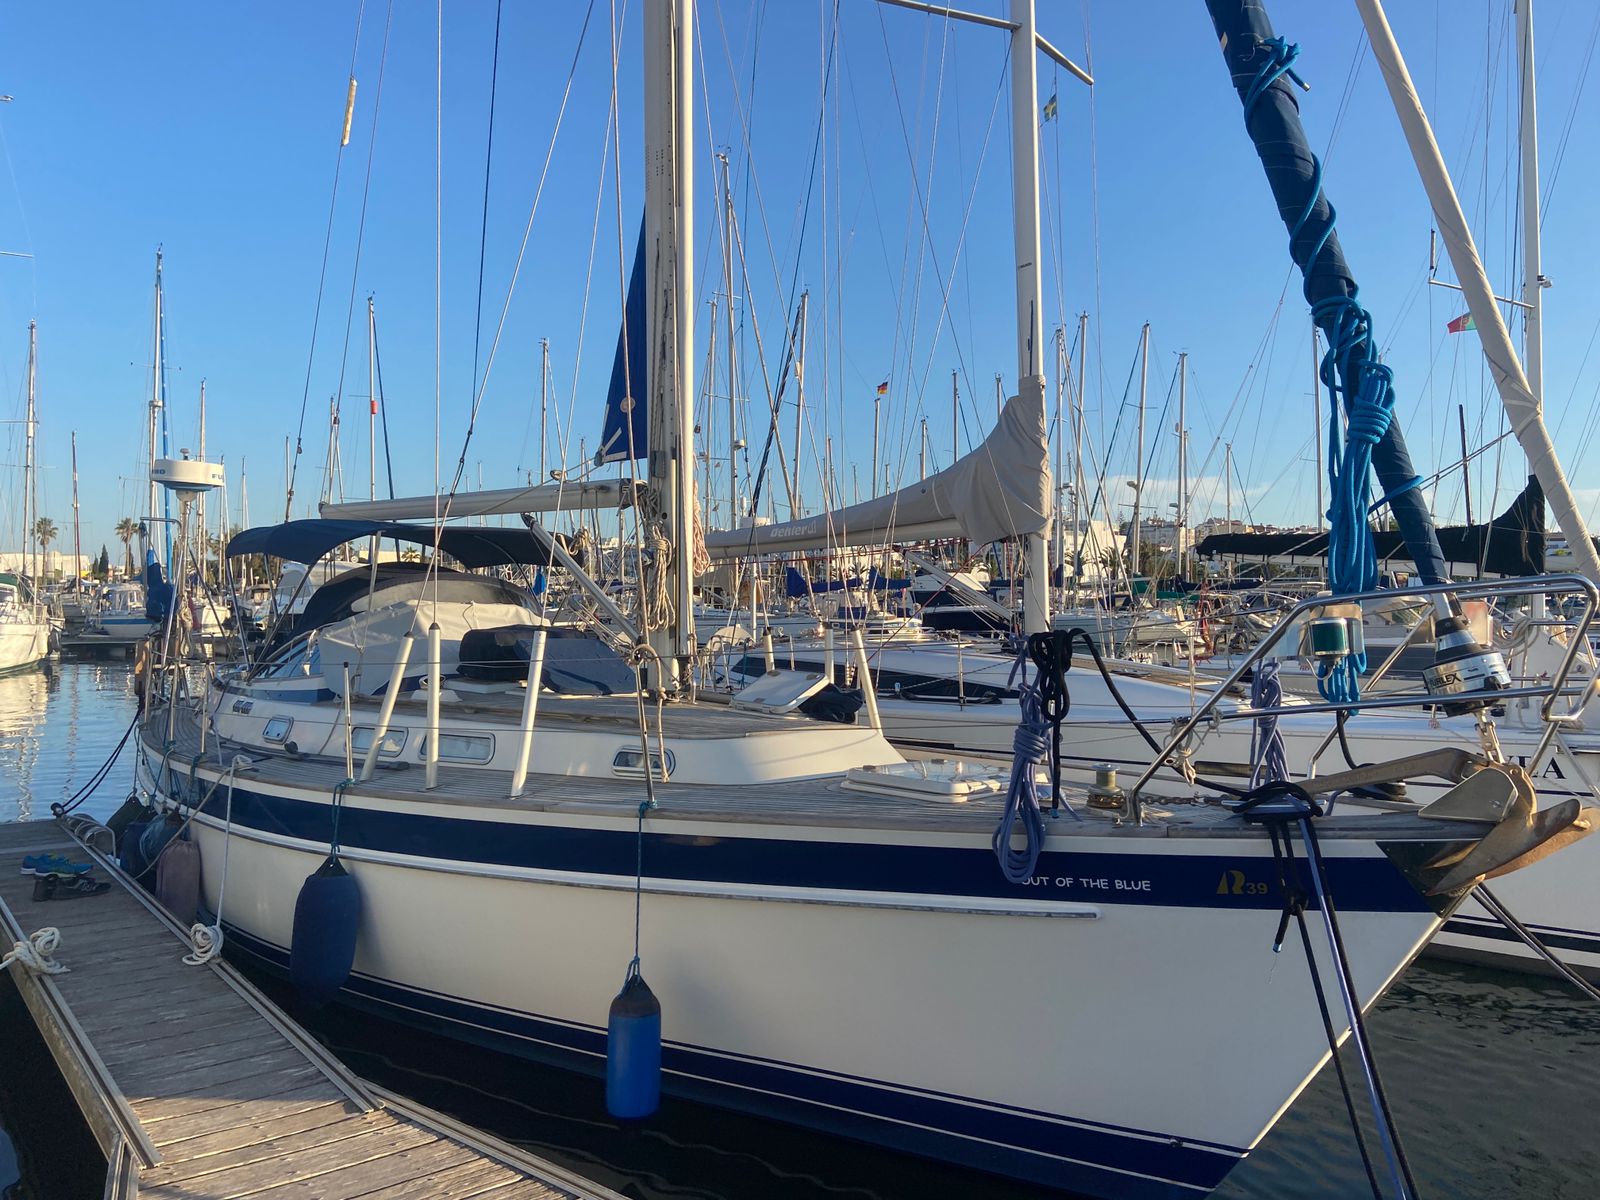 Hallberg Rassy 39 yacht moored up and ready for delivery to Kiel